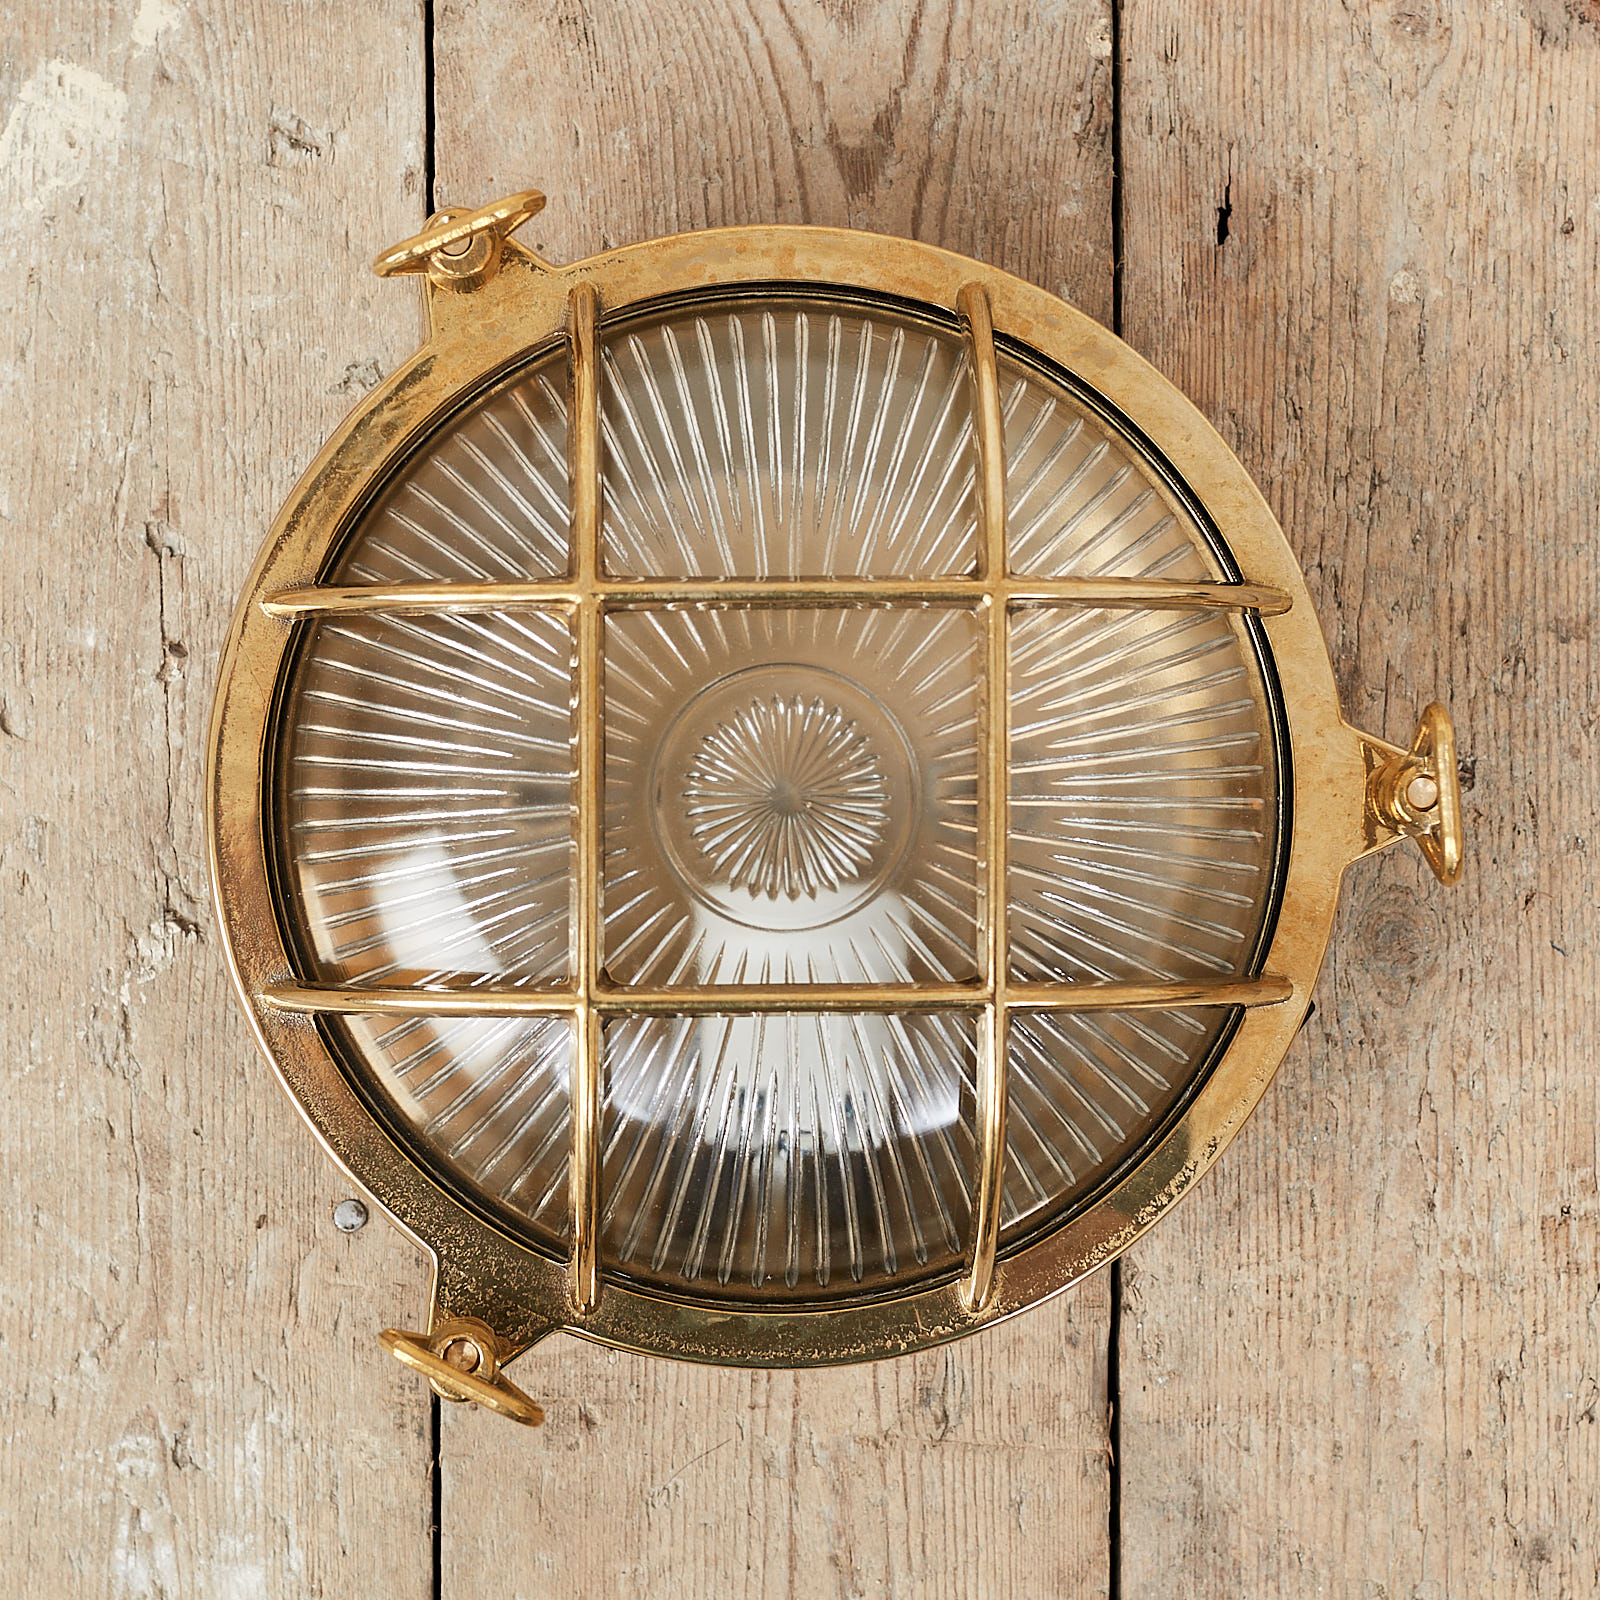 A round polished brass bulkhead light, - LASSCO - England's prime resource  for Architectural Antiques, Salvage Curiosities